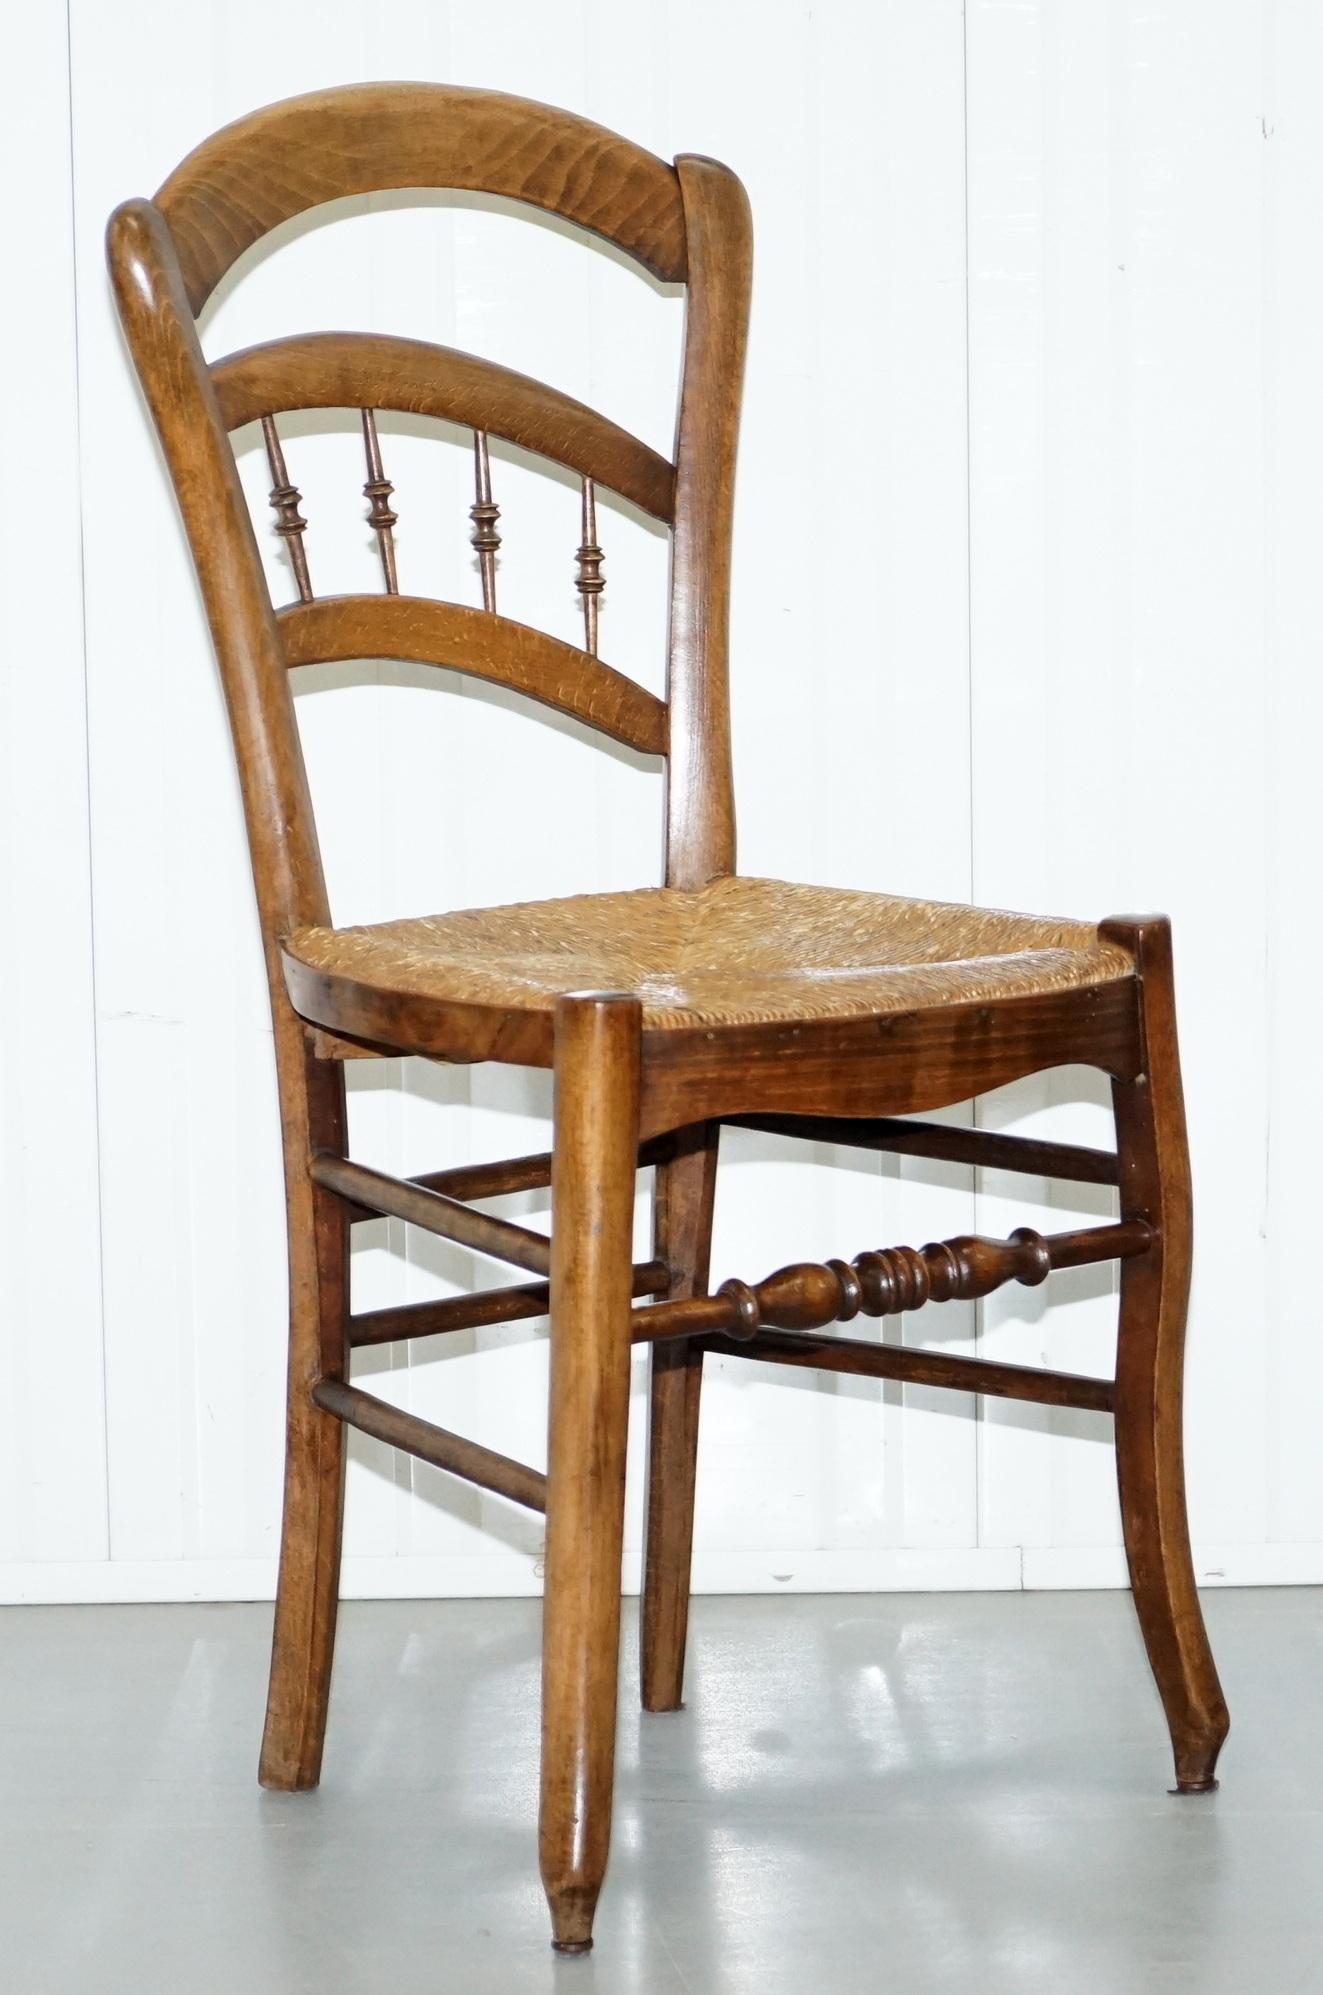 We are delighted to offer for sale this stunning set of four Arts & Crafts walnut rush seat dining chairs in the style of the original William Morris Sussex chair.

These chairs are a style and design classic, the William Morris Sussex chair is